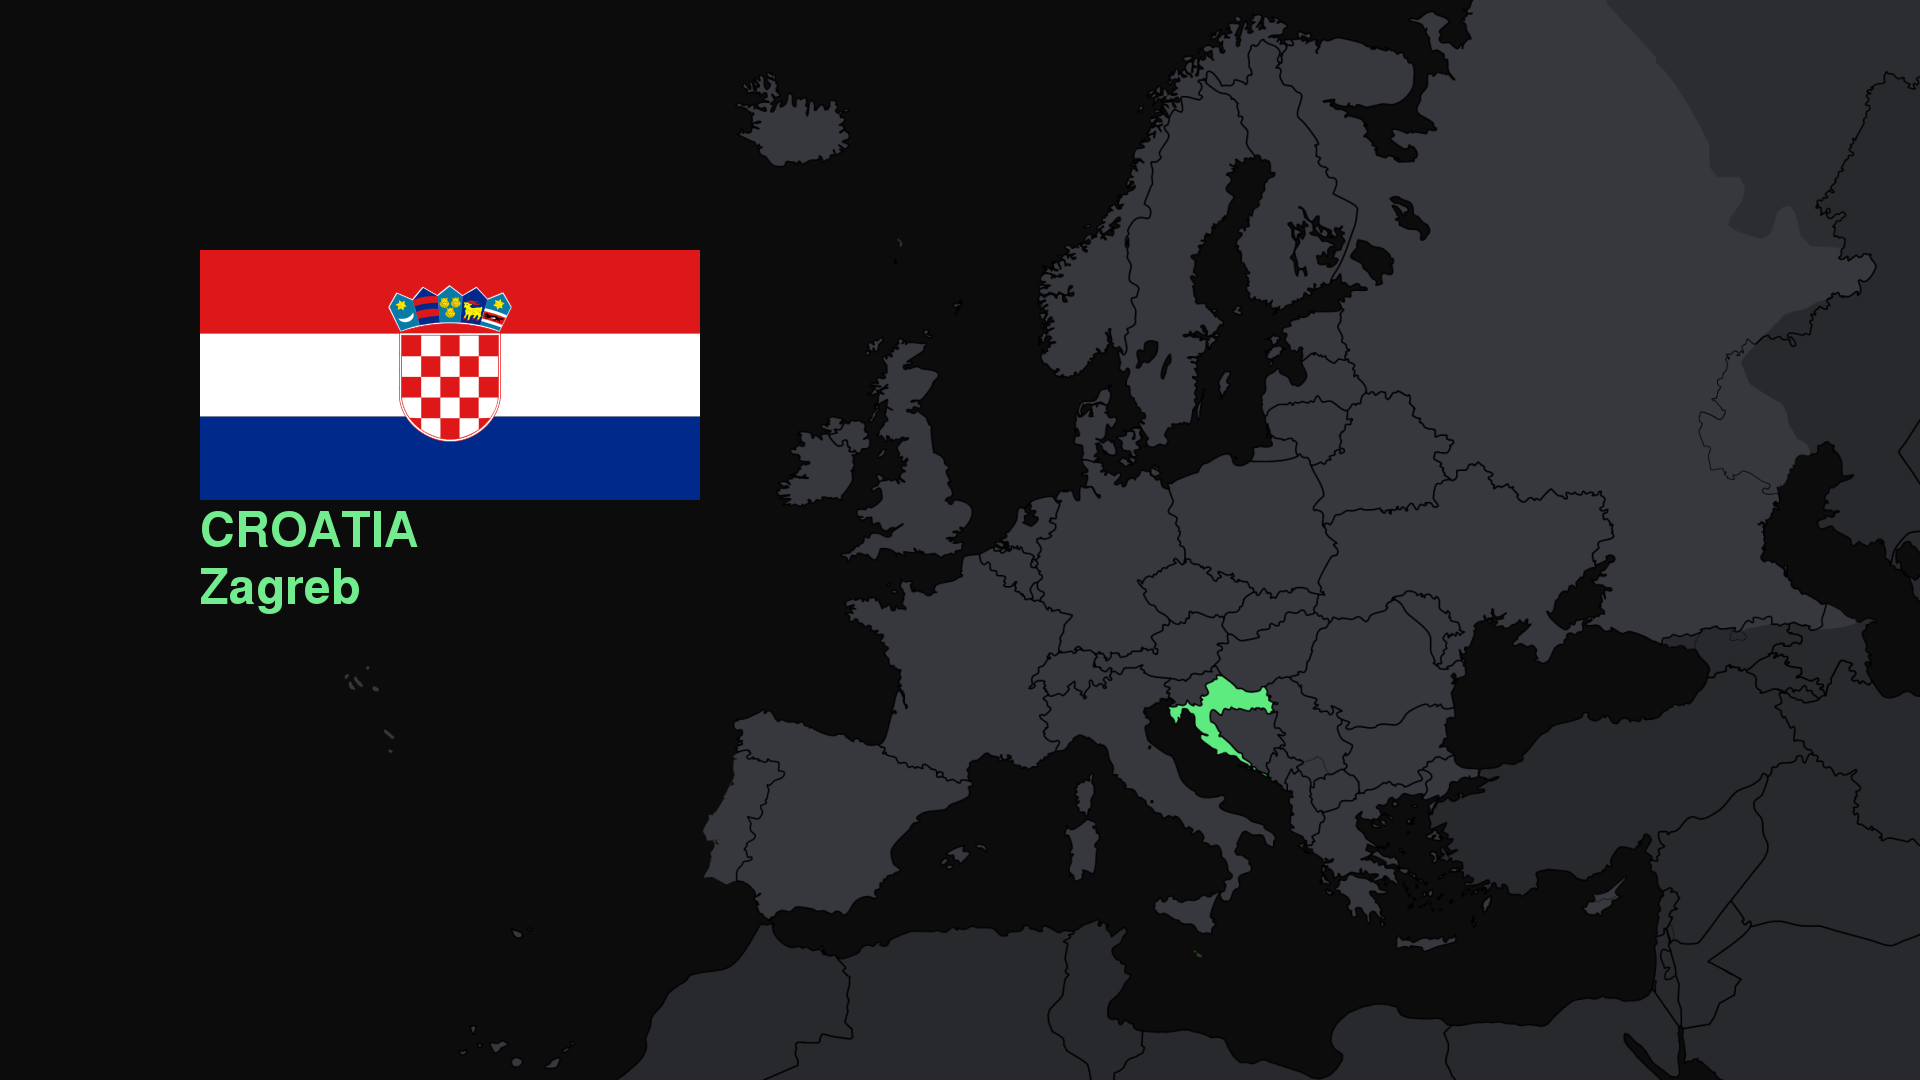 General 1920x1080 Croatia Europe flag map countries geography